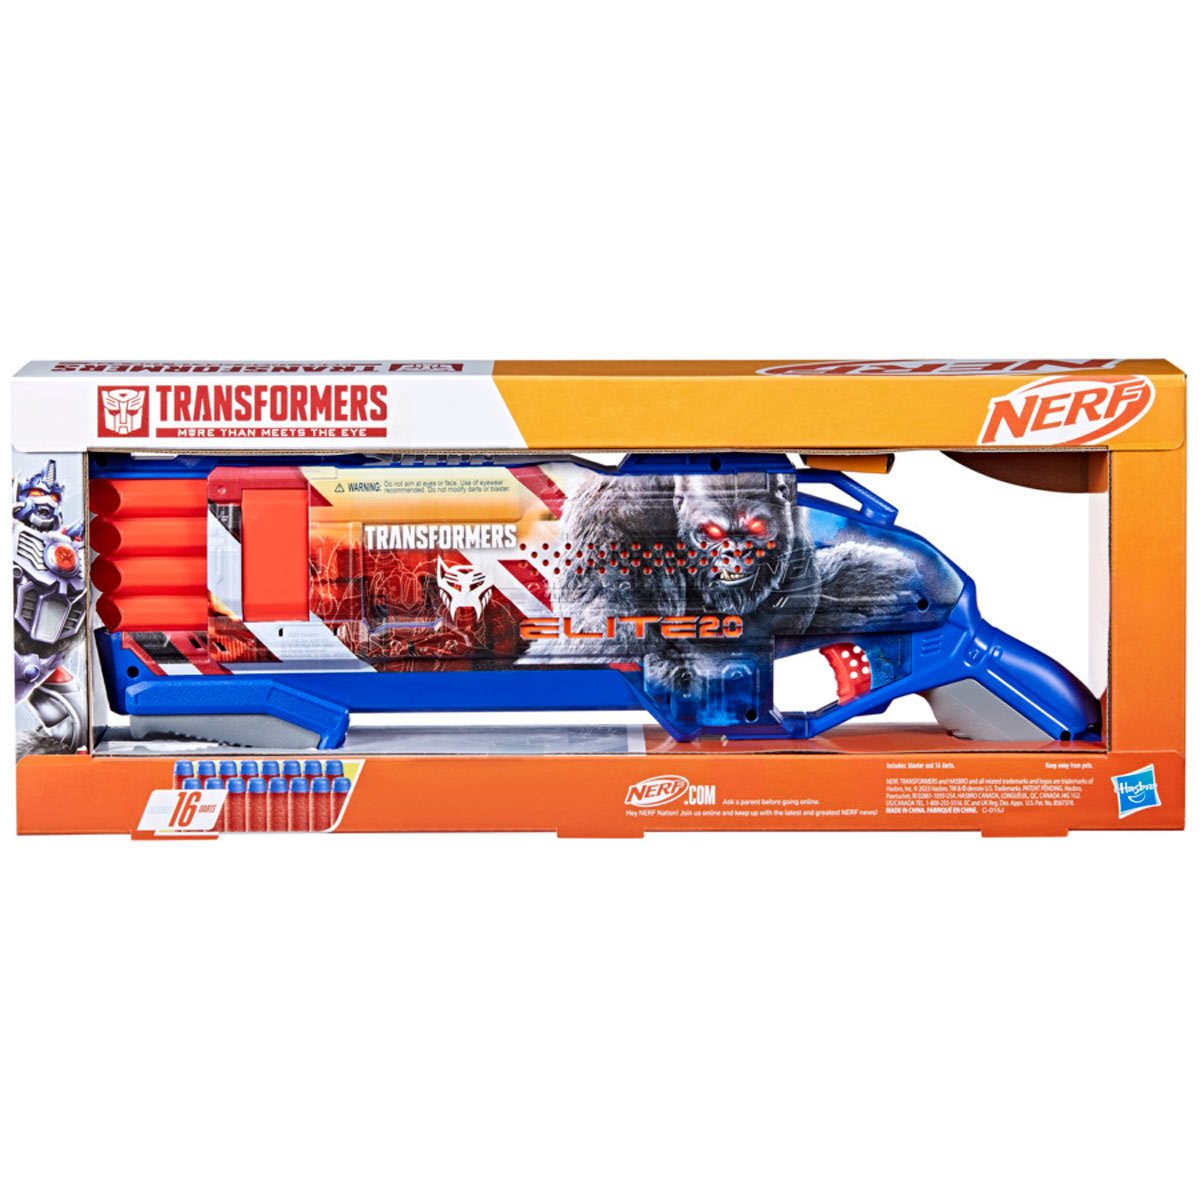 This Optimus Prime Toy Can Transform Into a Nerf Blaster - CNET